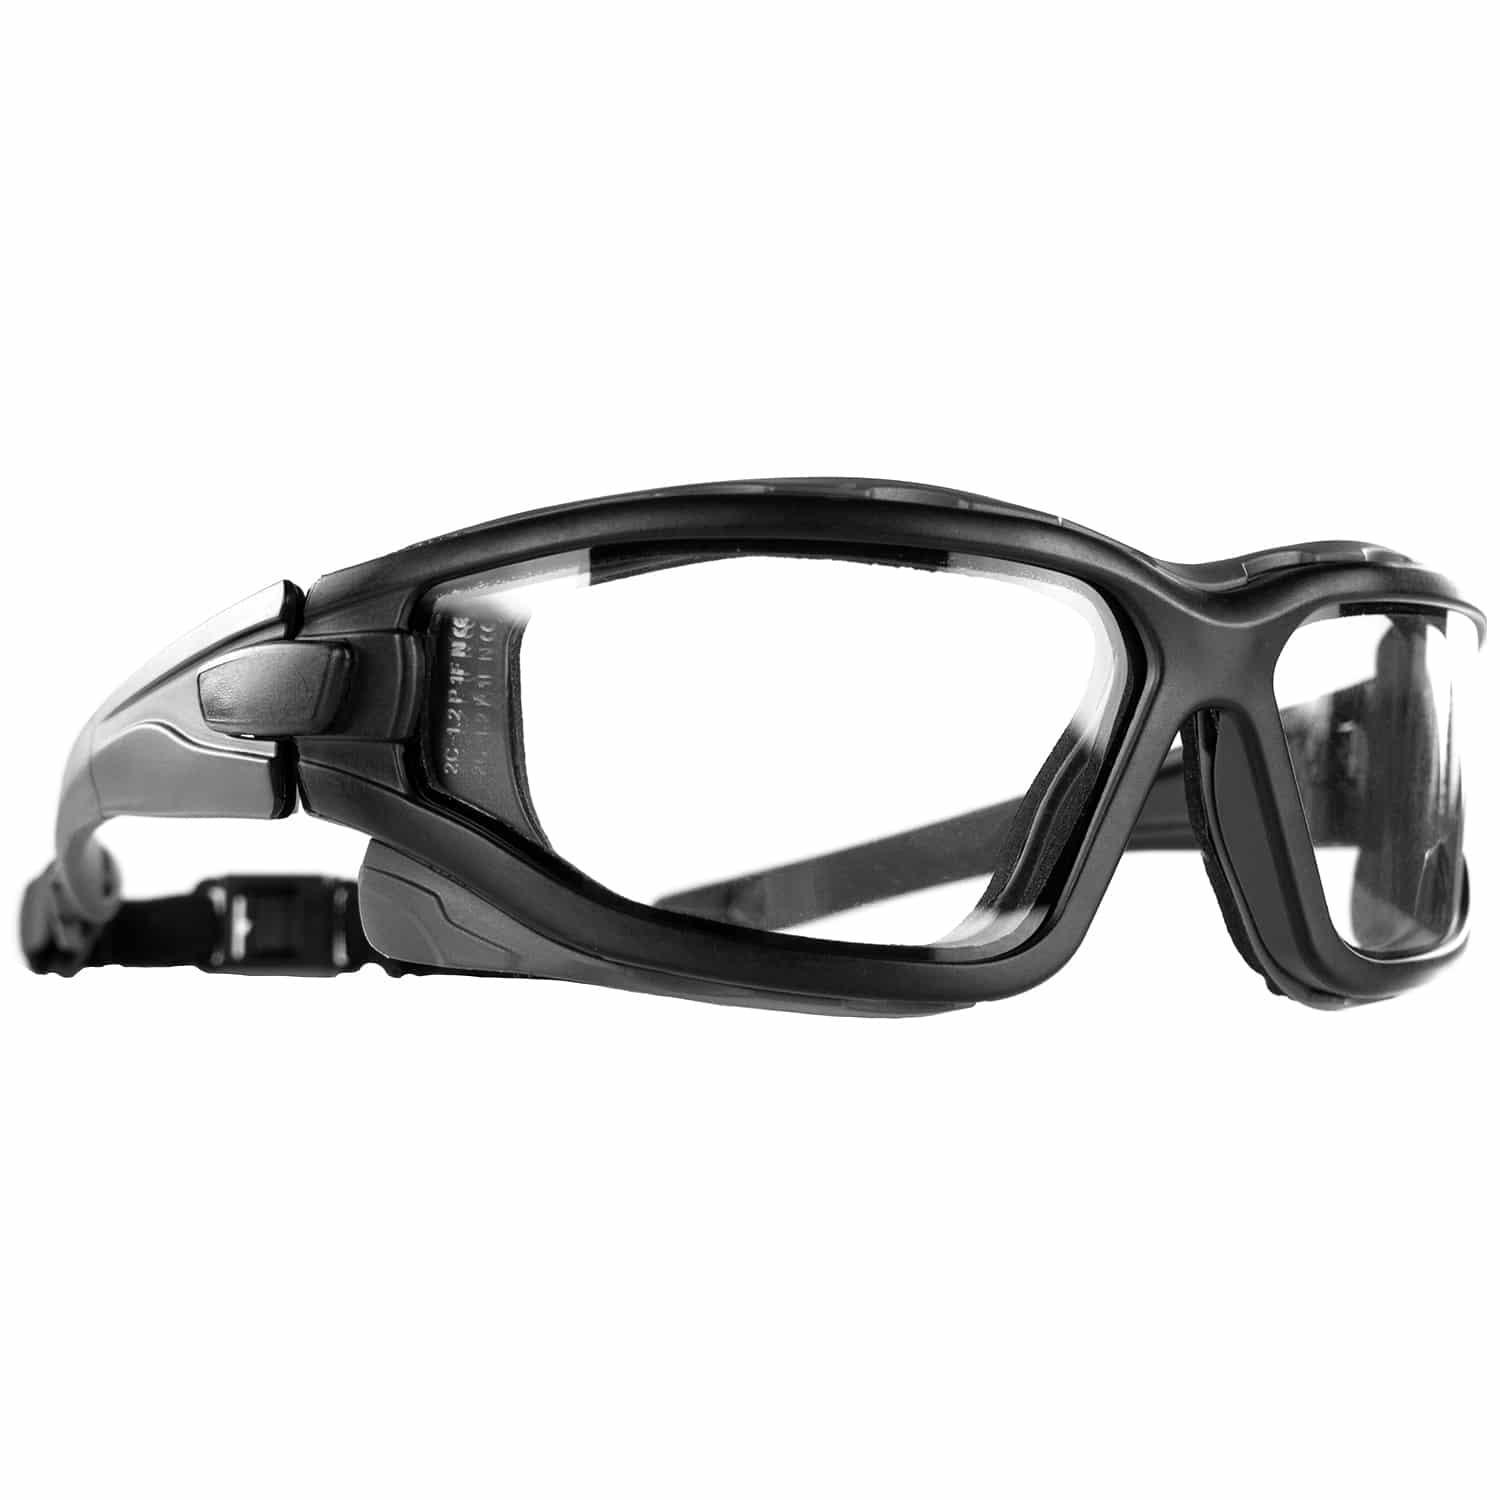 Novritsch Anti Fog Safety Goggles – Low Profile